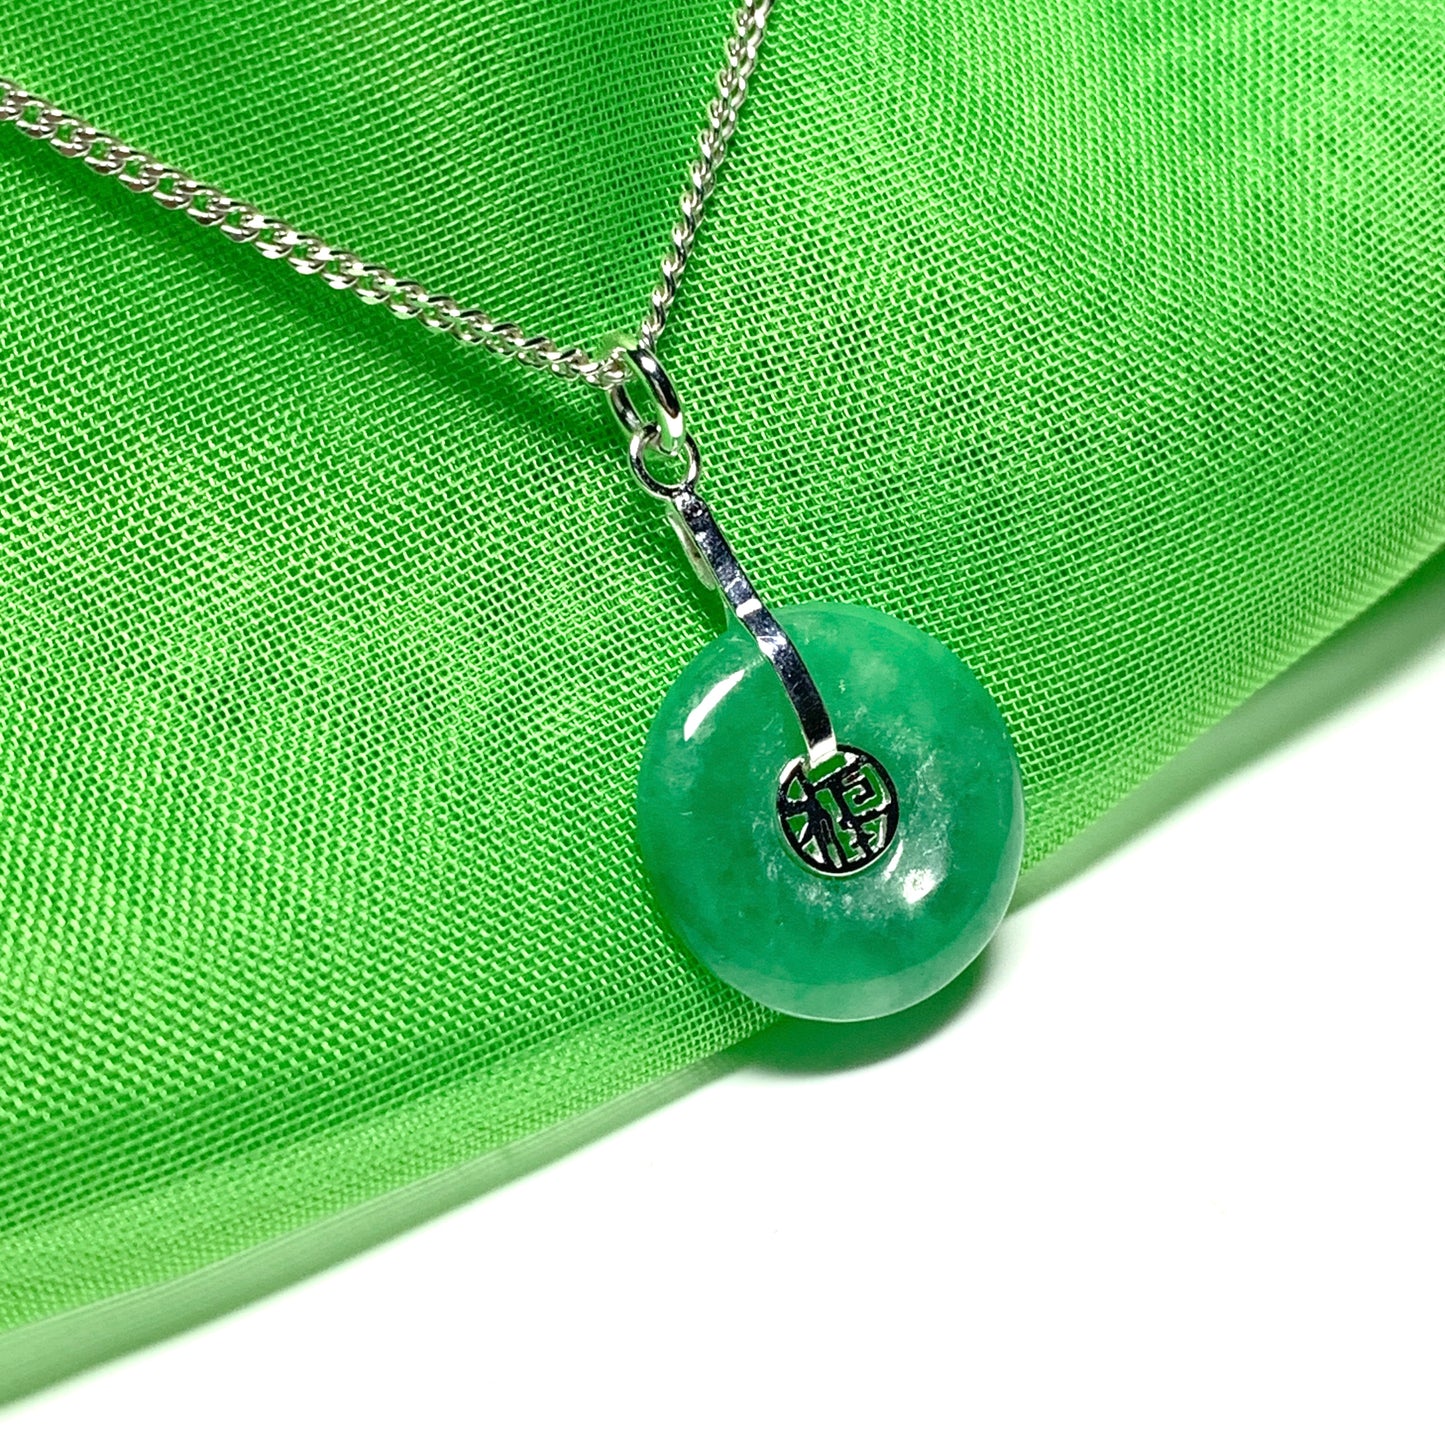 Sterling Silver Round Green Jade Necklace